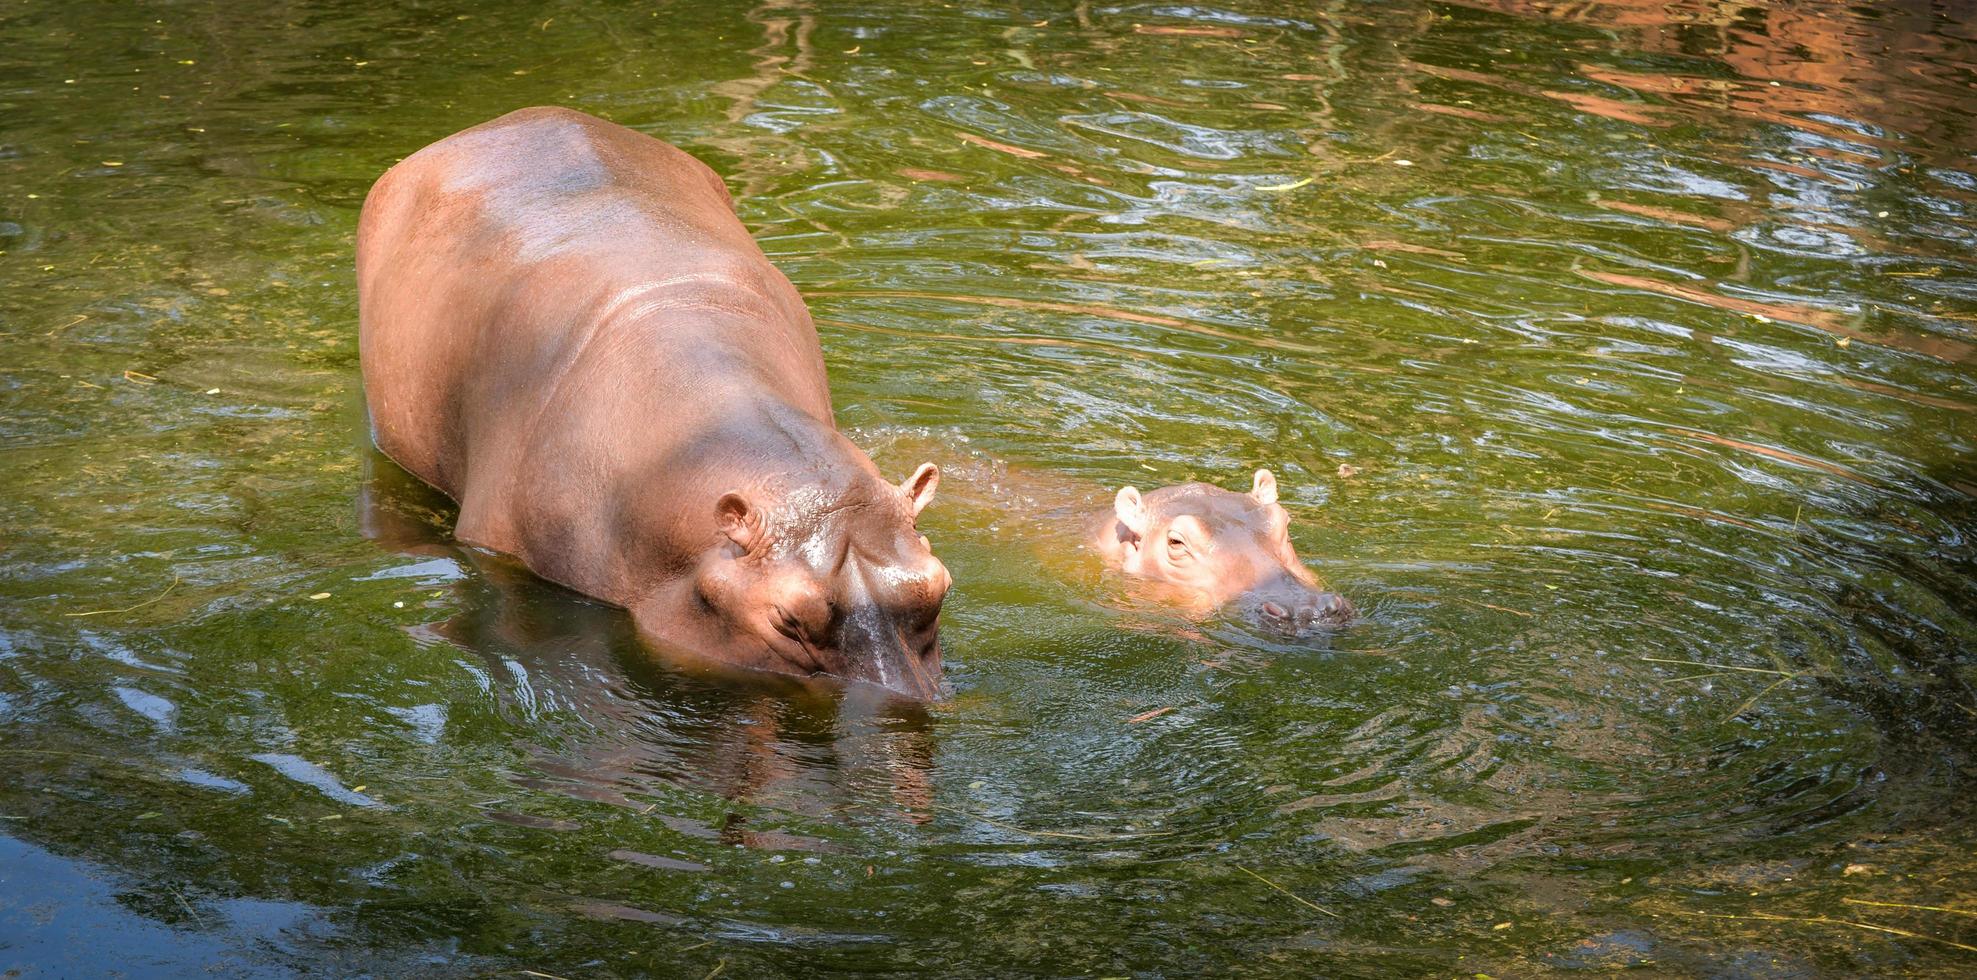 Hippopotamus floating on the water in hippo farm in the wildlife sanctuary photo